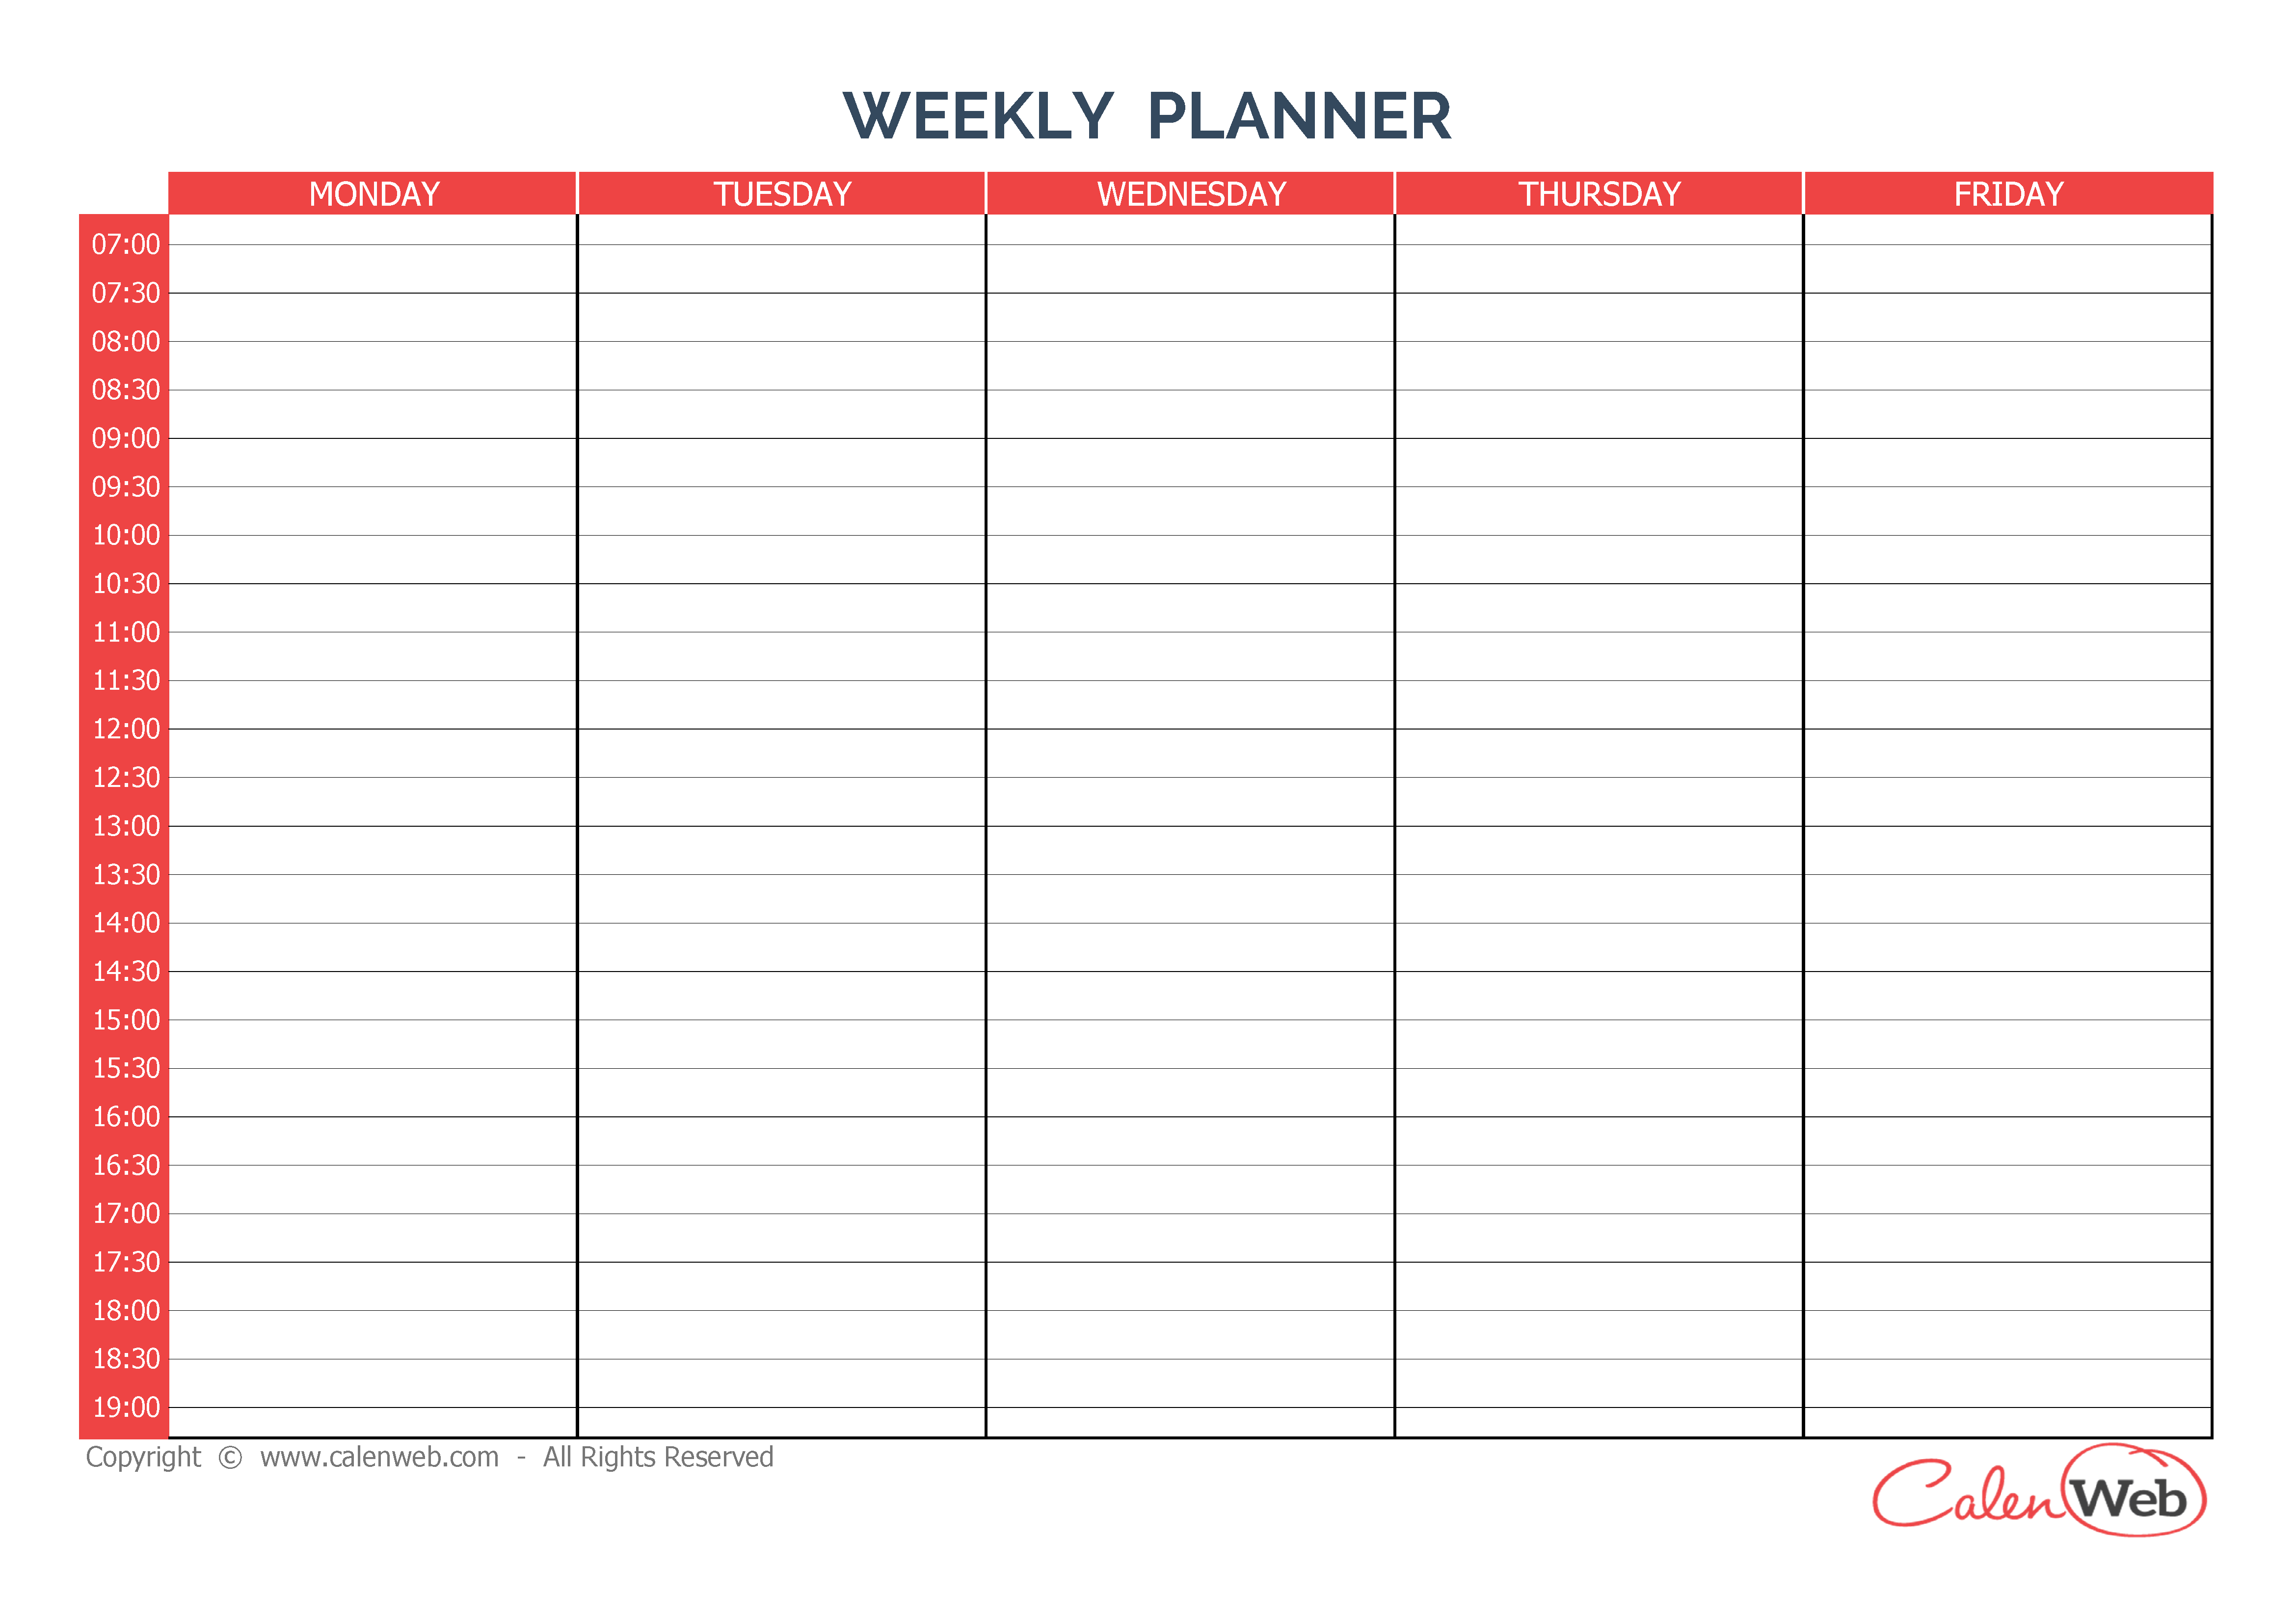 Weekly Planner 5 Days A Week Of 5 Days  Calenweb for Monday To Friday Planner